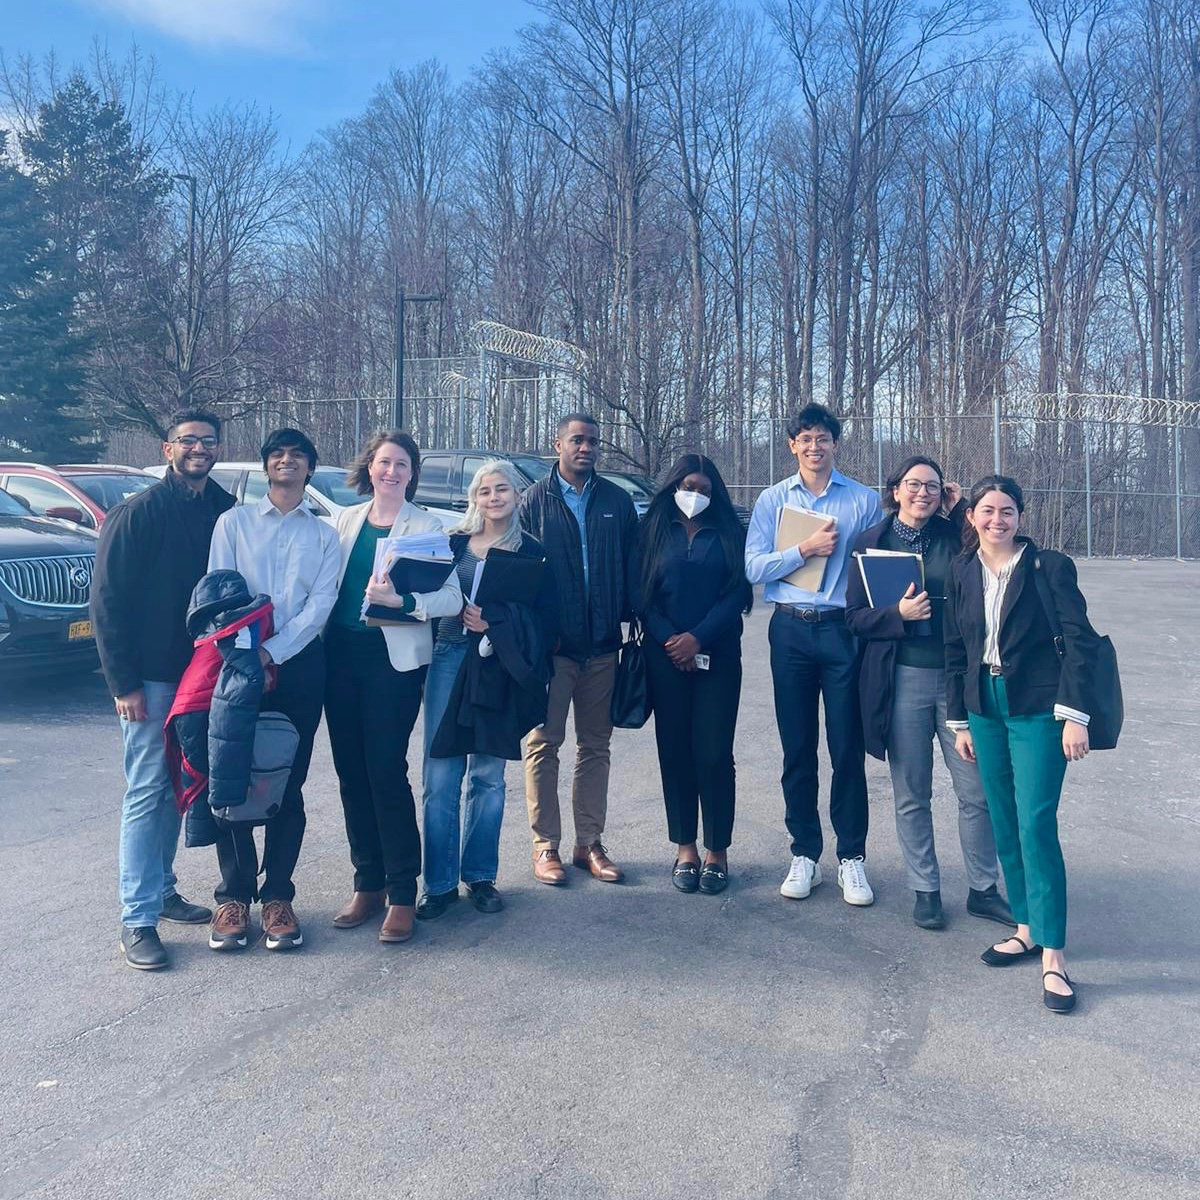 Recently, Cornell Law students and faculty in the 1L Immigration Law and Advocacy Clinic traveled to the Buffalo Federal Detention Facility in Batavia, New York. Read more about their visit and work here: bit.ly/4azE7zv #CornellLawSchool